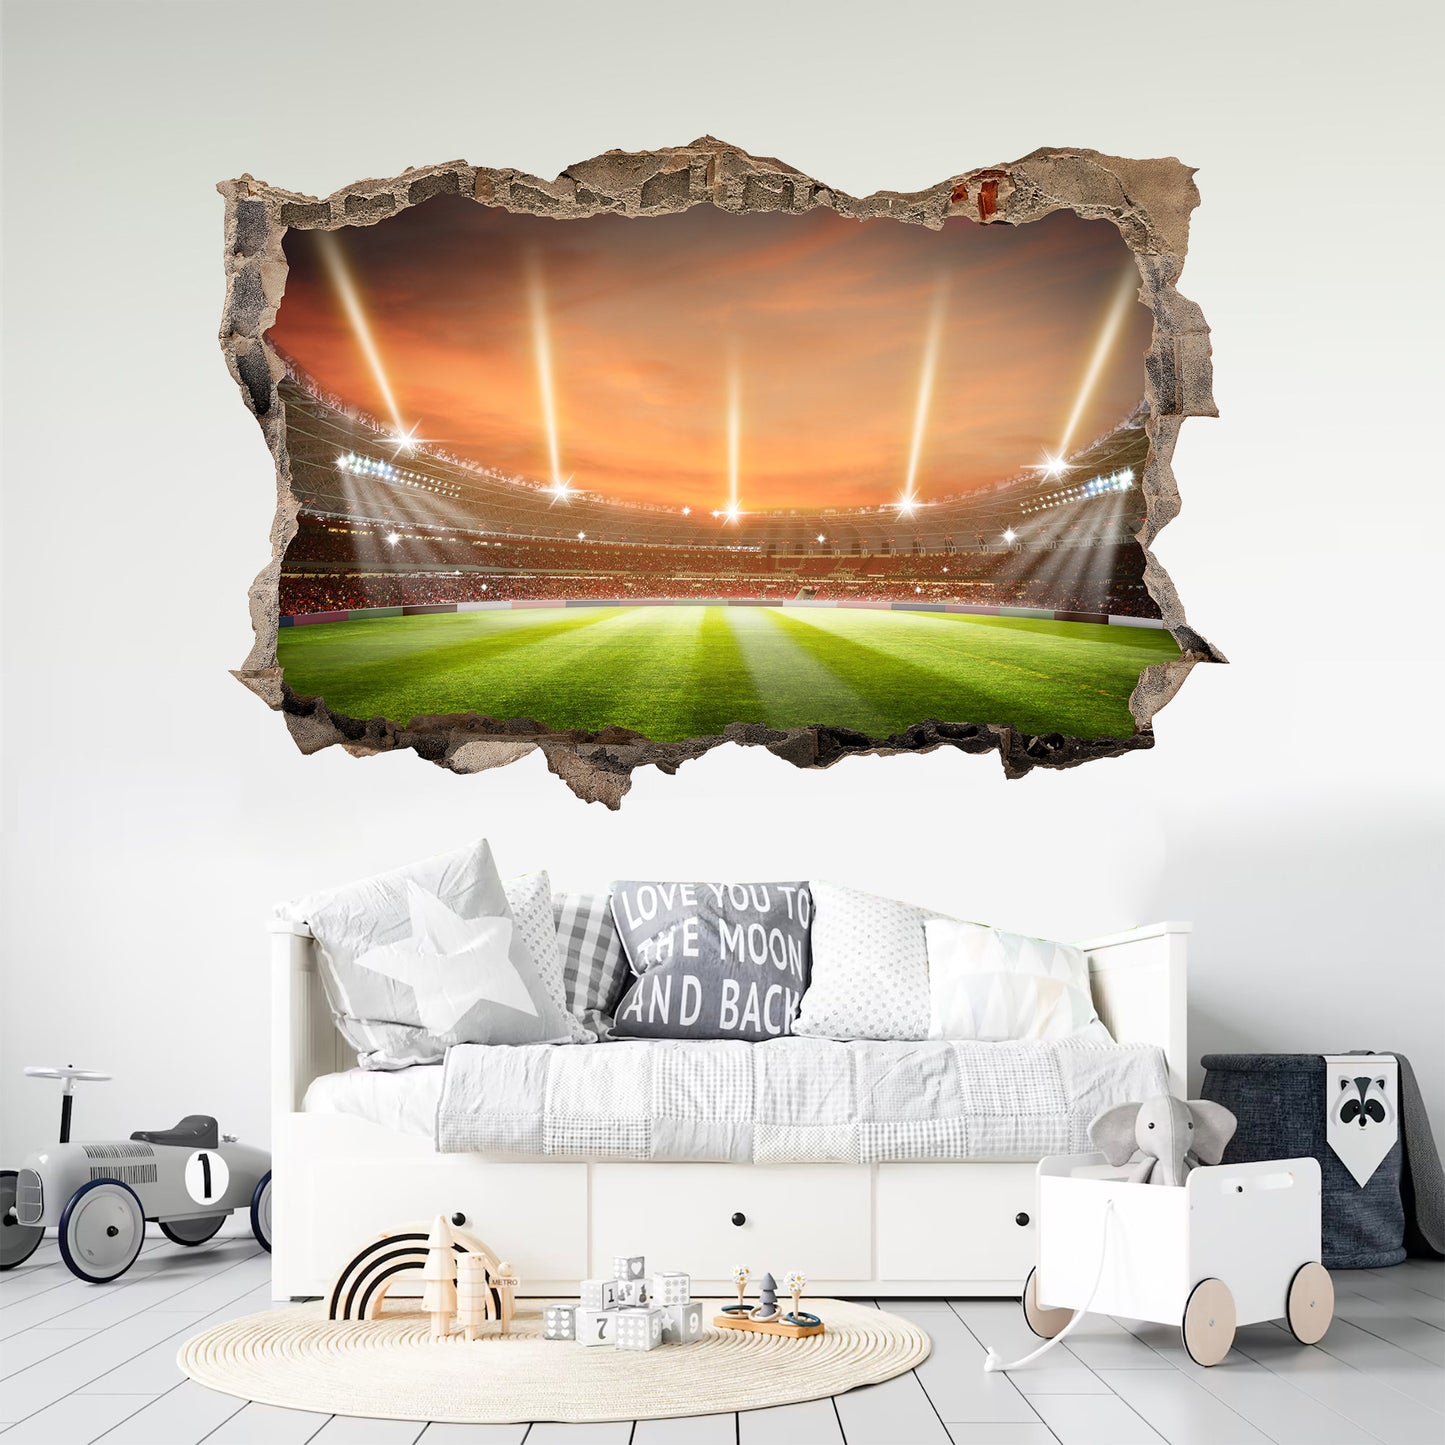 Rugby Stadium Behine 3D Broken Wall Decal - Removable Peel and Stick -BW005